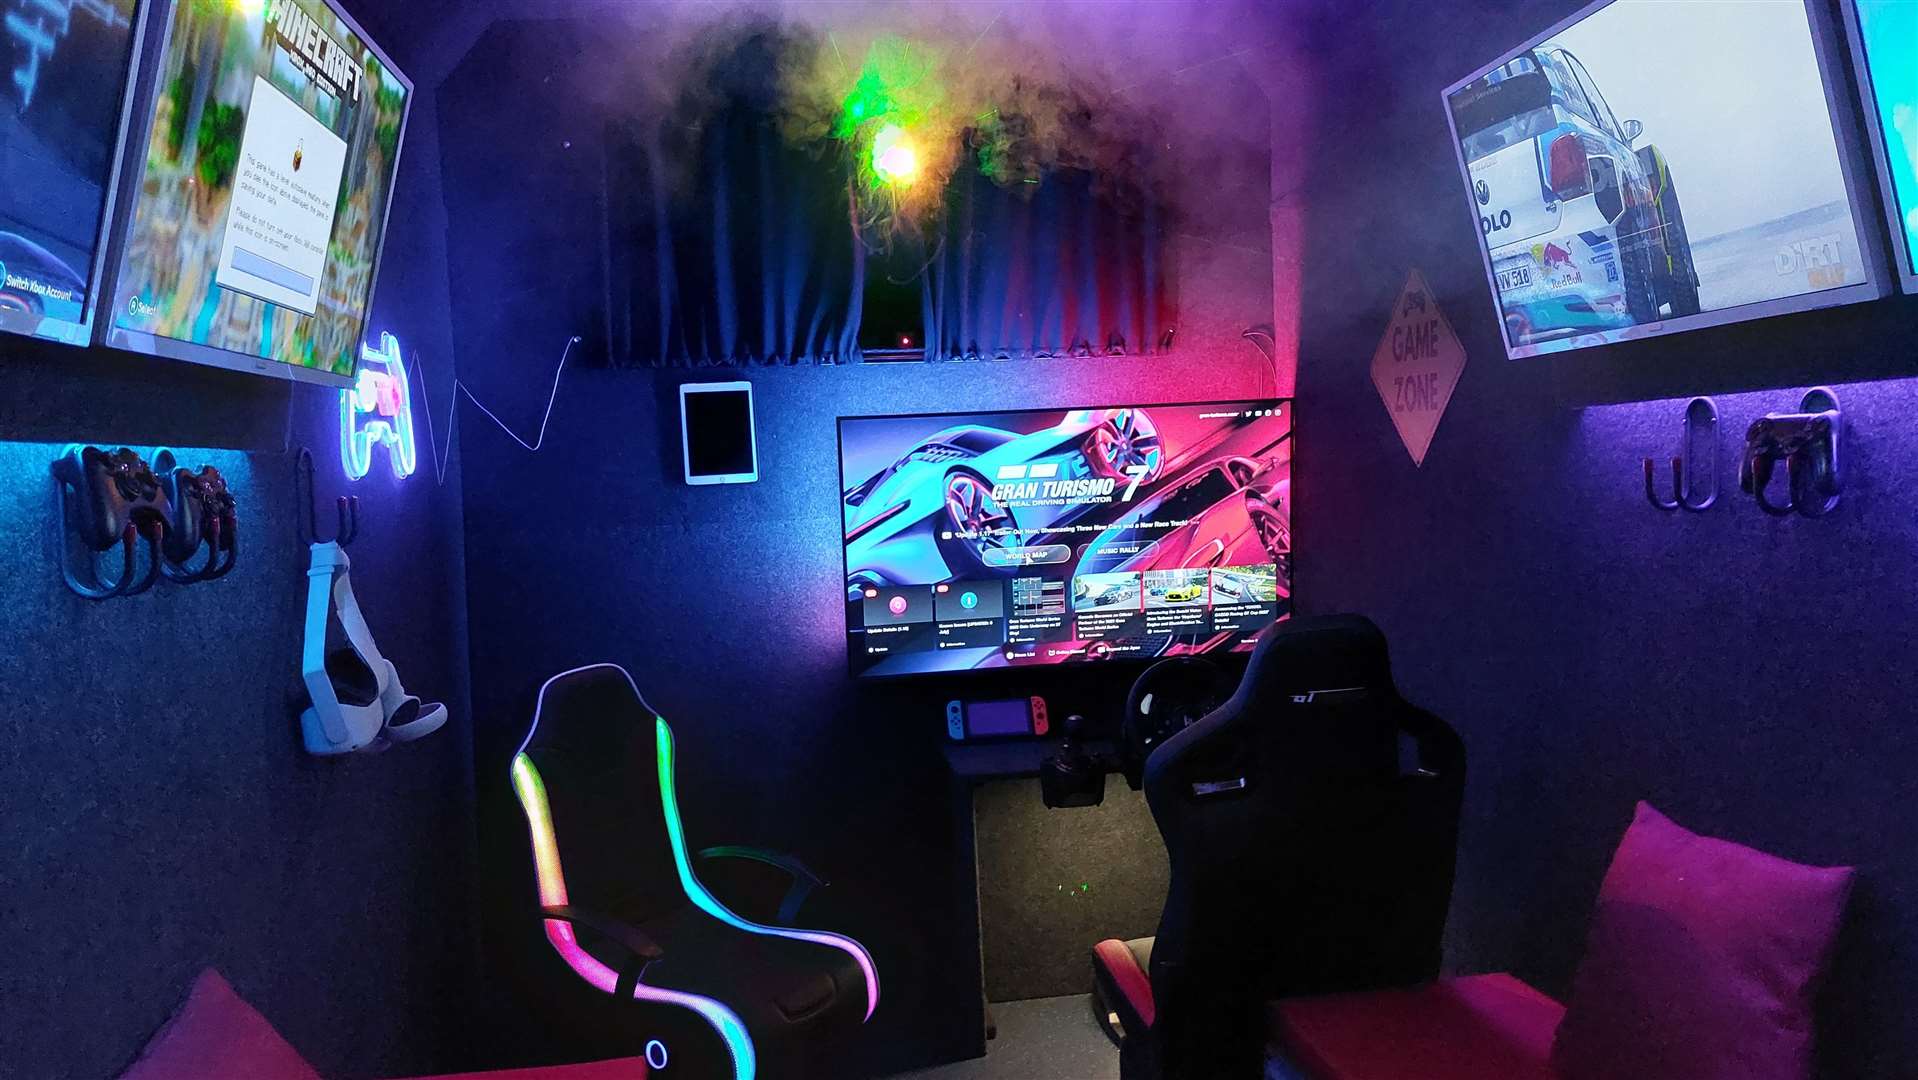 There lazers, smoke machines and a driving simulator